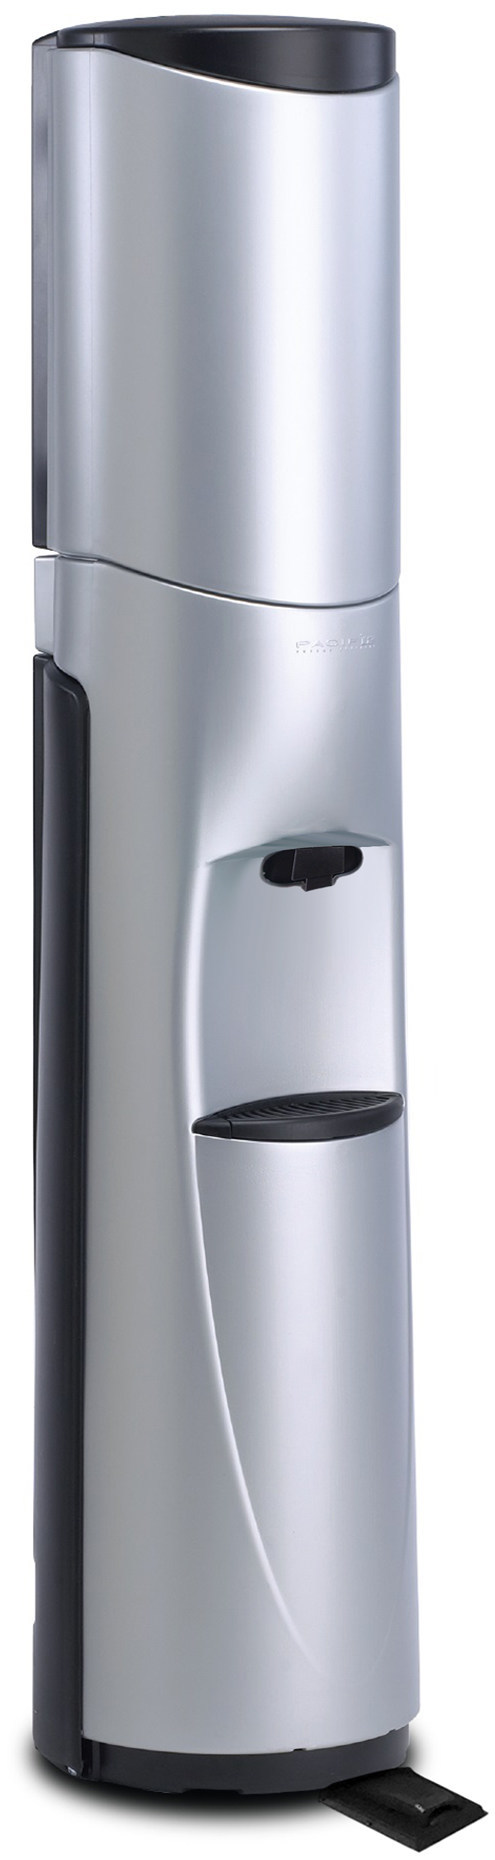 Pacifik Touchless Water Cooler